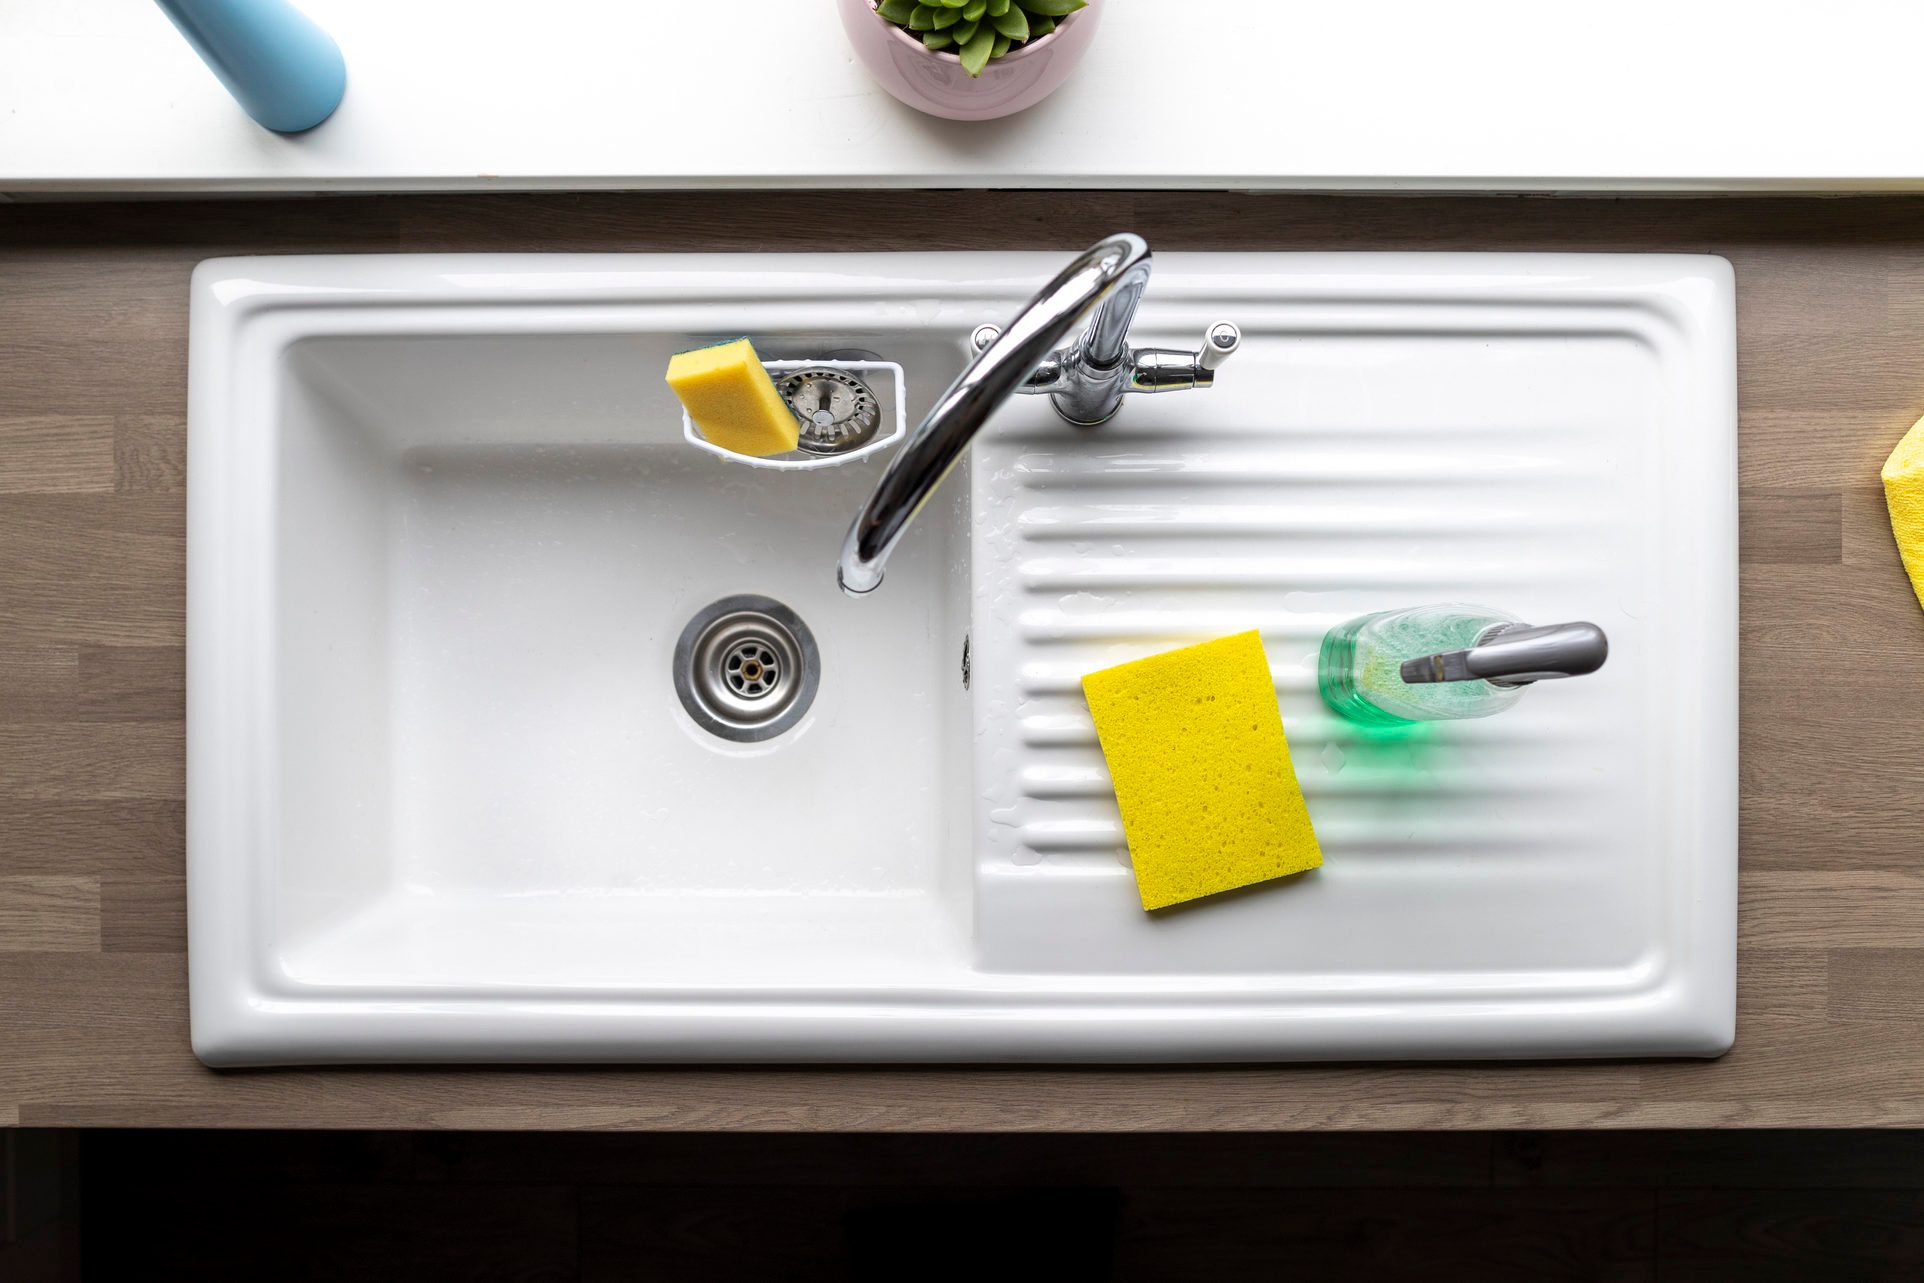 how to clean a smelly sponge